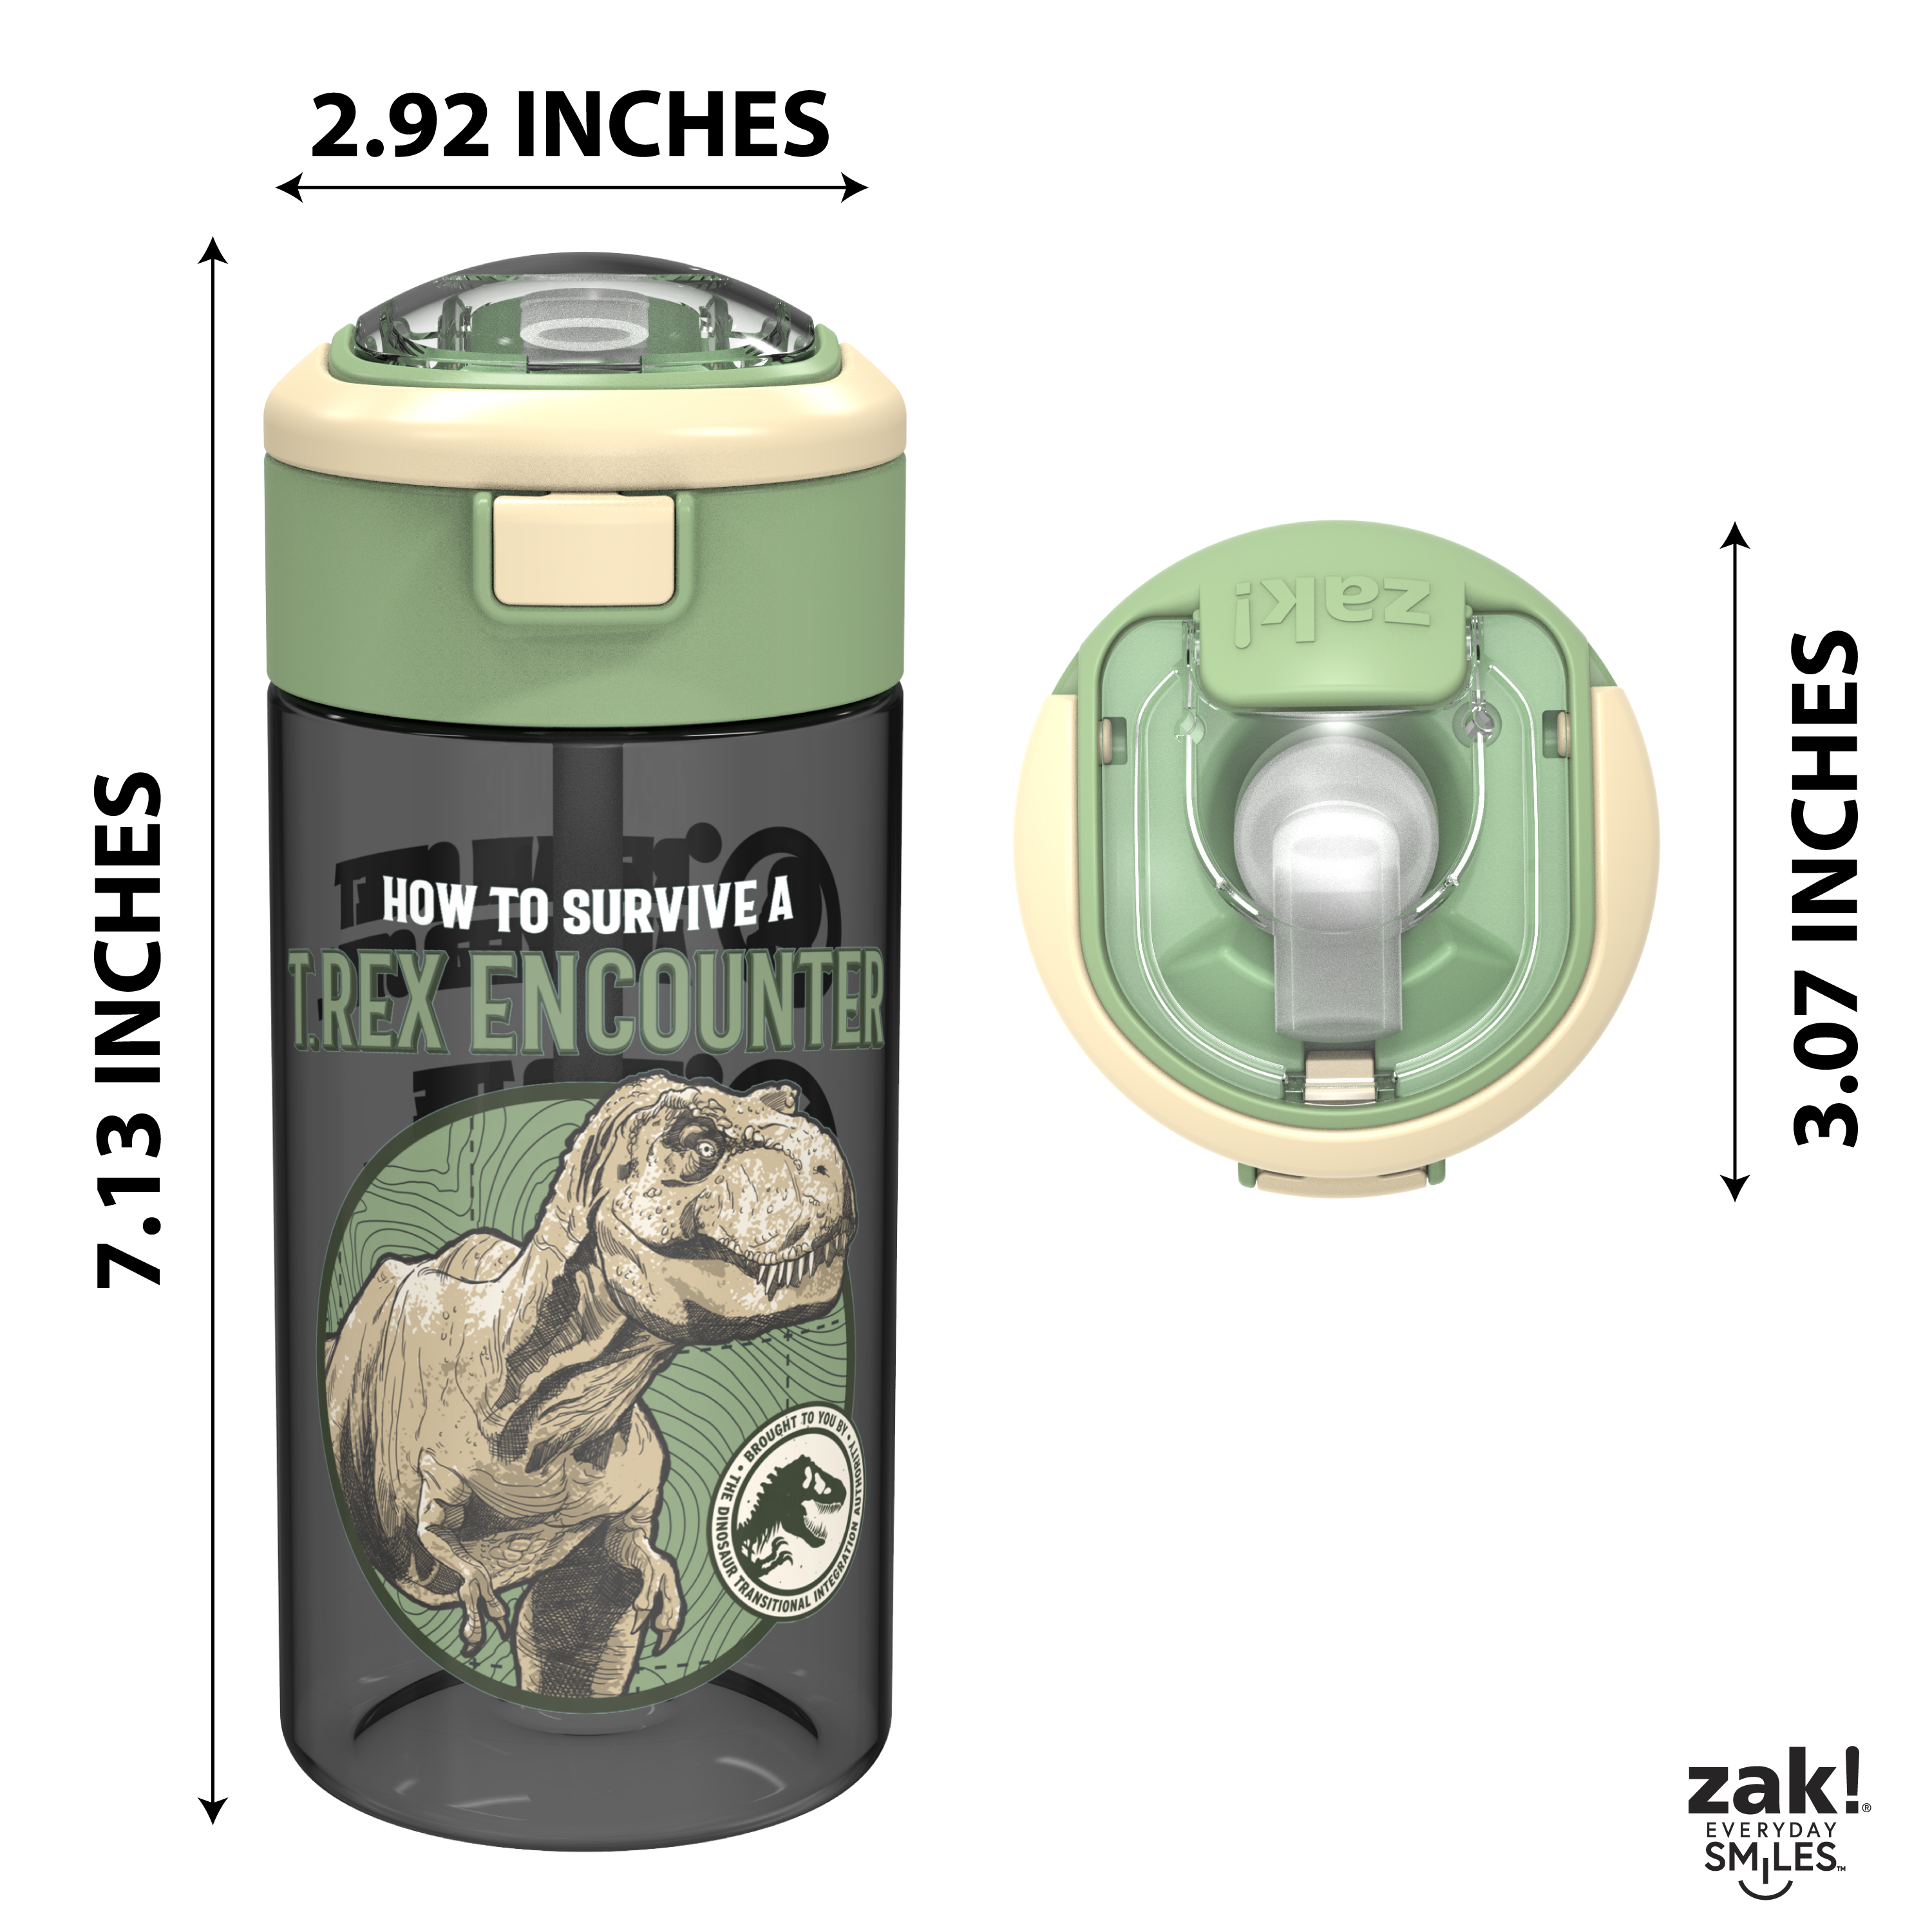 Jurassic World Dominion 18 ounce Reusable Plastic Water Bottle with Push-button lid, How to Survive a T-Rex Encounter, 2-piece set slideshow image 8